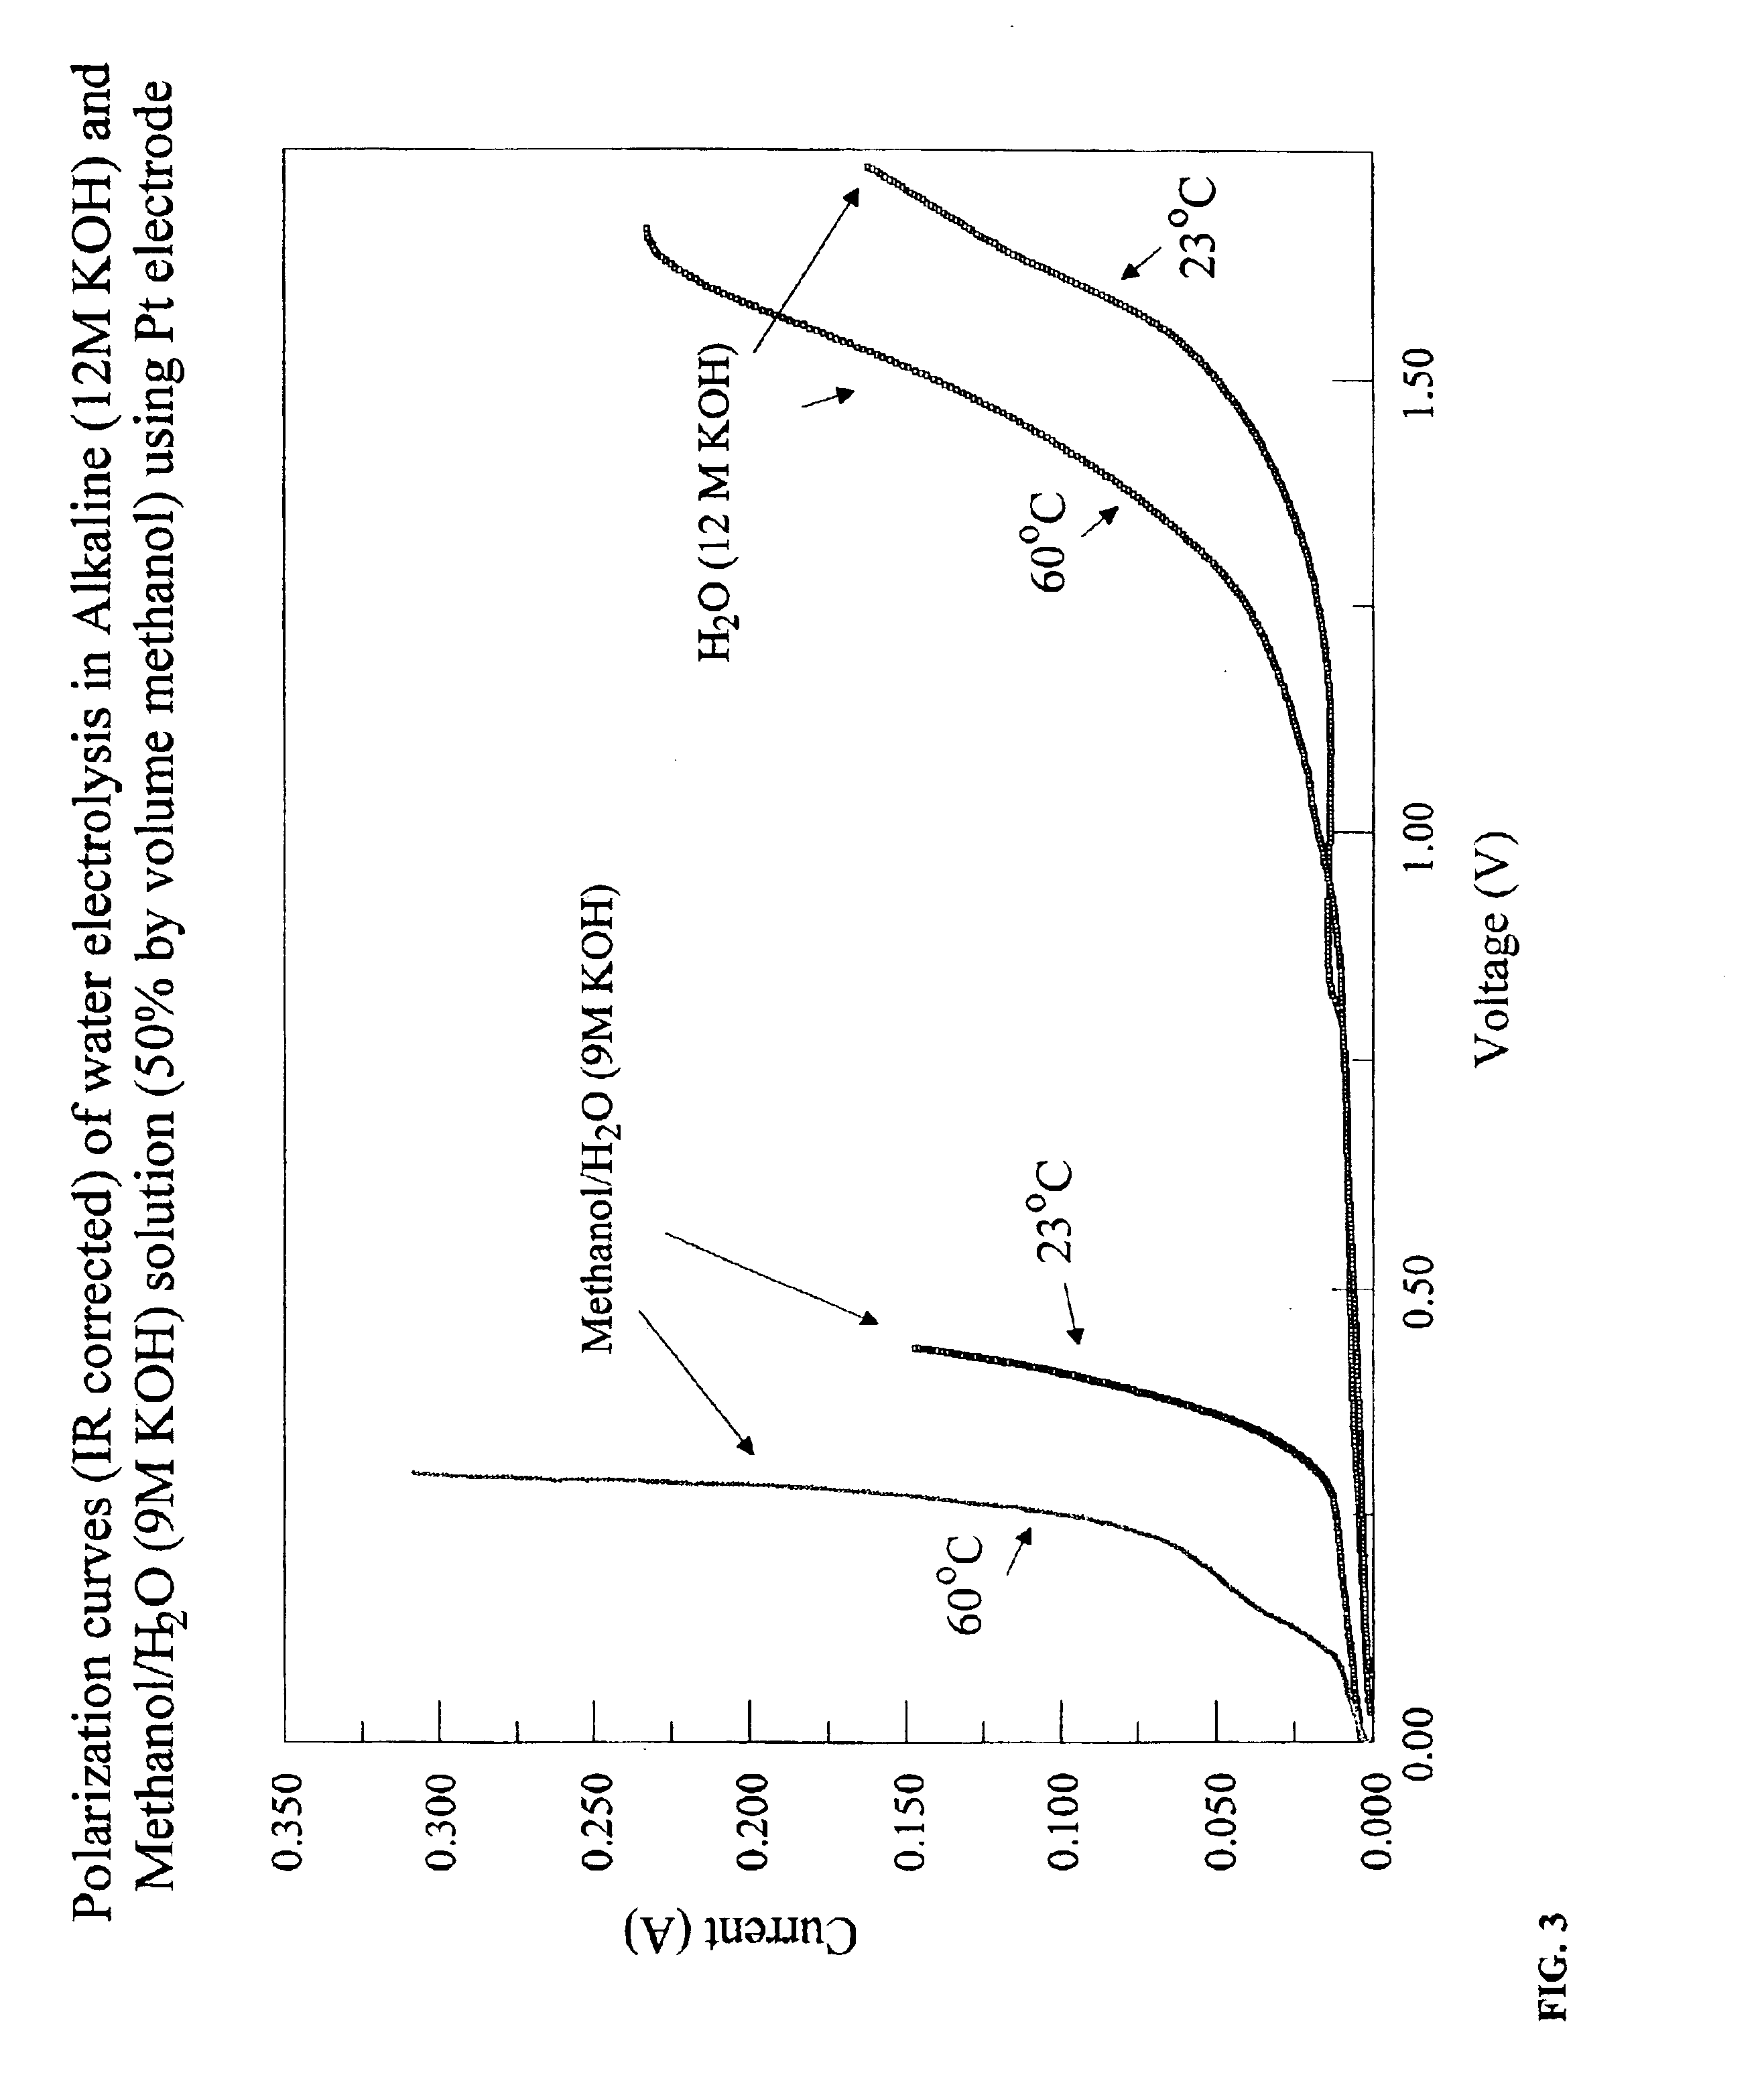 Electrolytic production of hydrogen